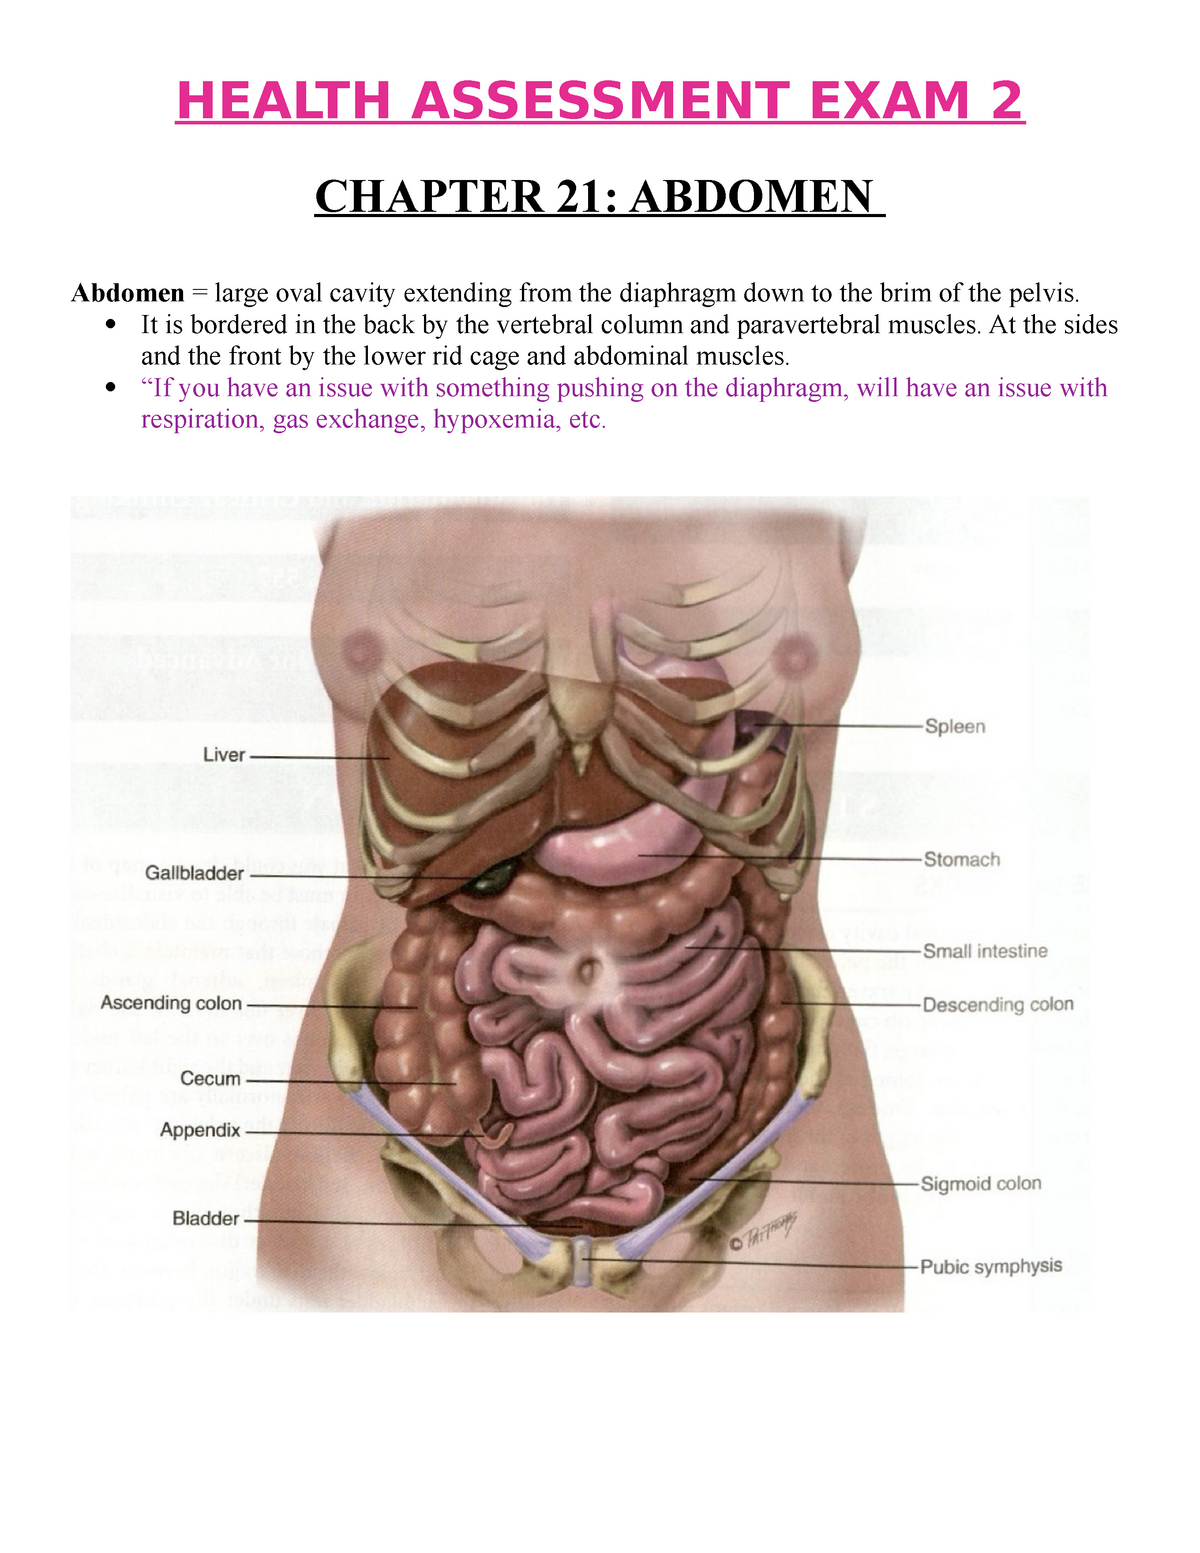 Health Assessment Exam 2 Notes The Abdomen Chapter 21 Complete